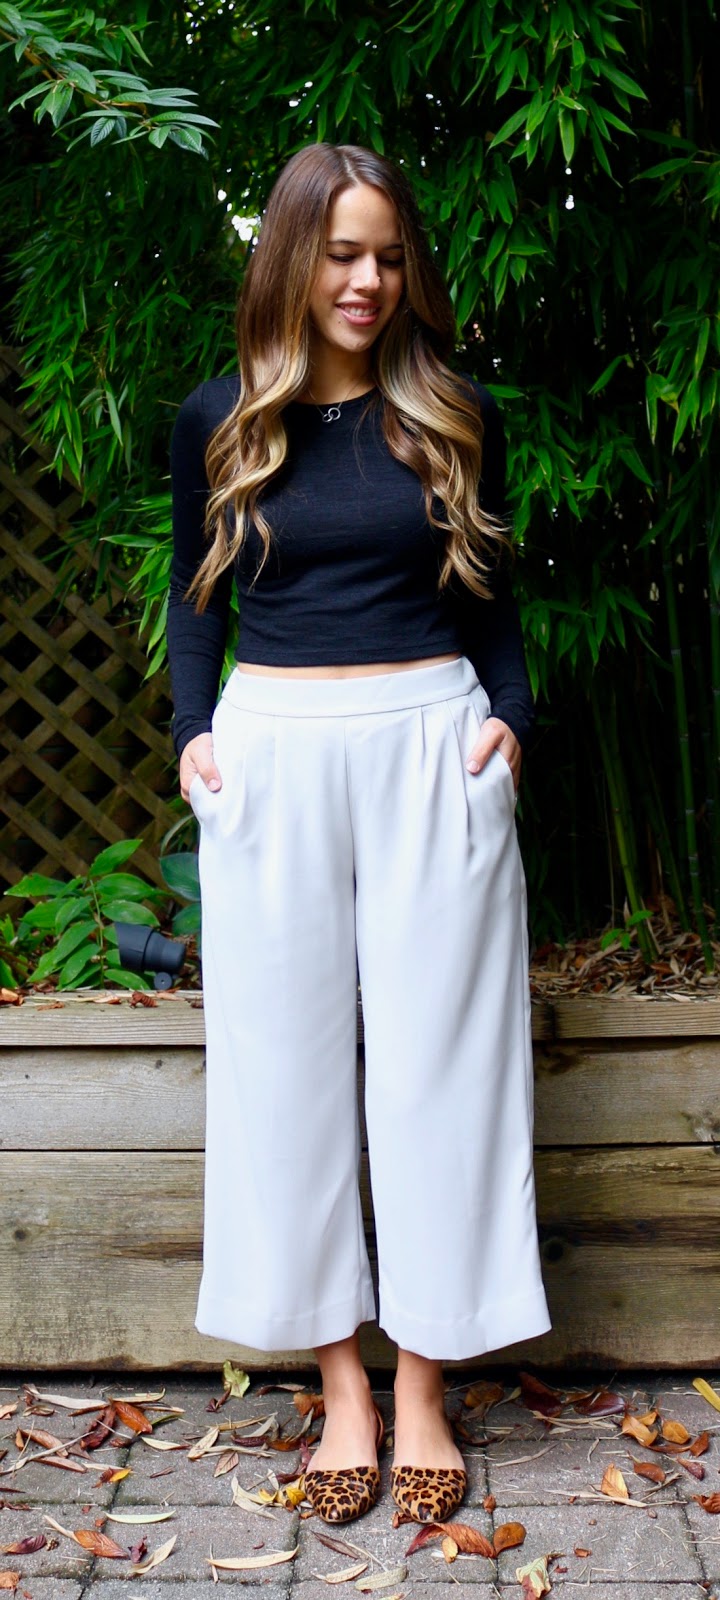 Jules in Flats - Culottes with Crop Sweater (Business Casual Fall Workwear on a Budget) 